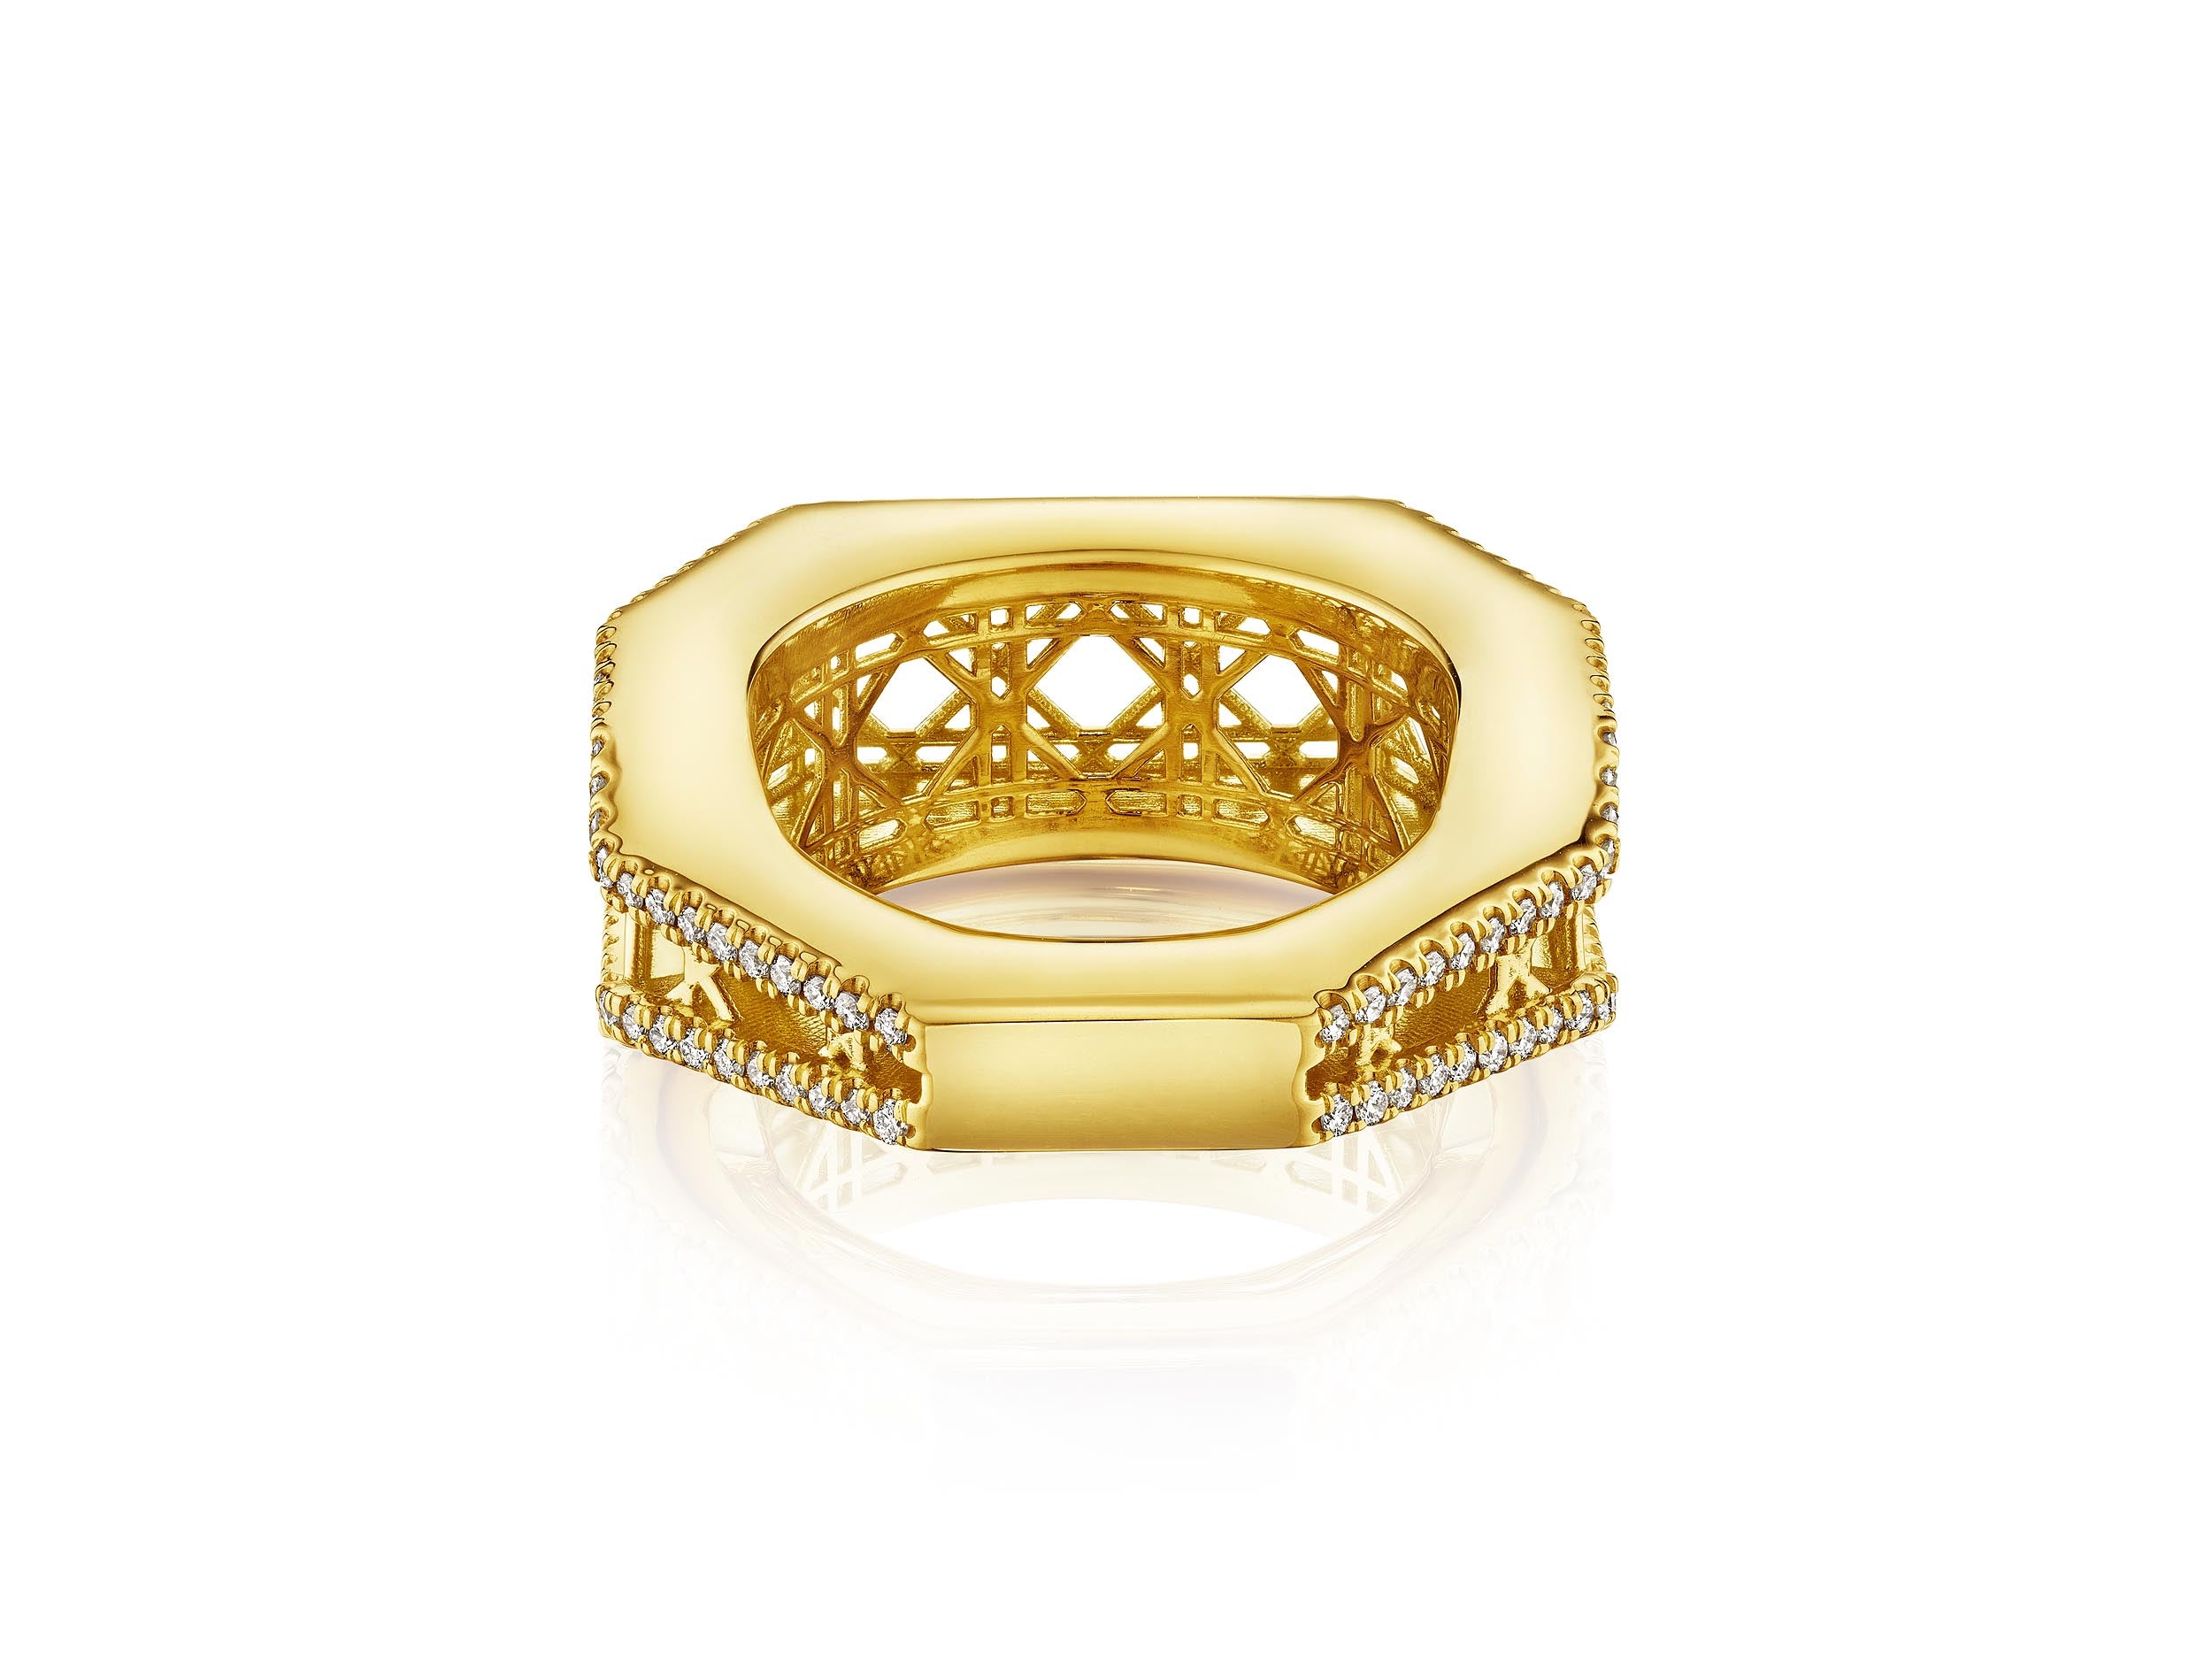 Fine Cane Ring, 18K Yellow Gold and Pavé Diamonds